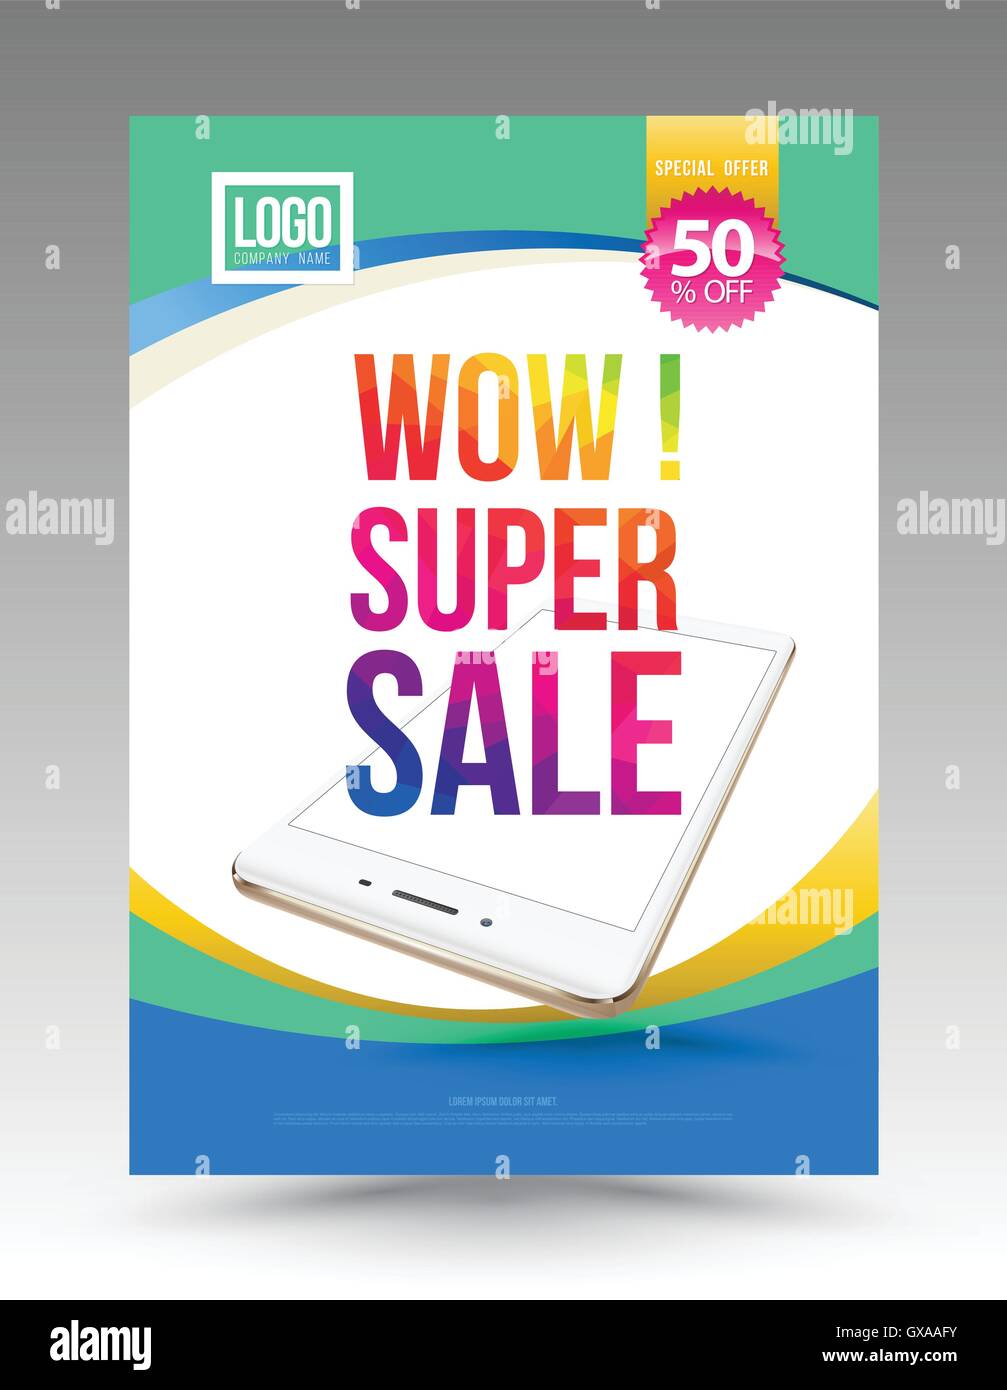 5th day sale poster. Sale and discounts advertising template. Vector illustration. Sale banner. Sale discount special offer. Stock Vector